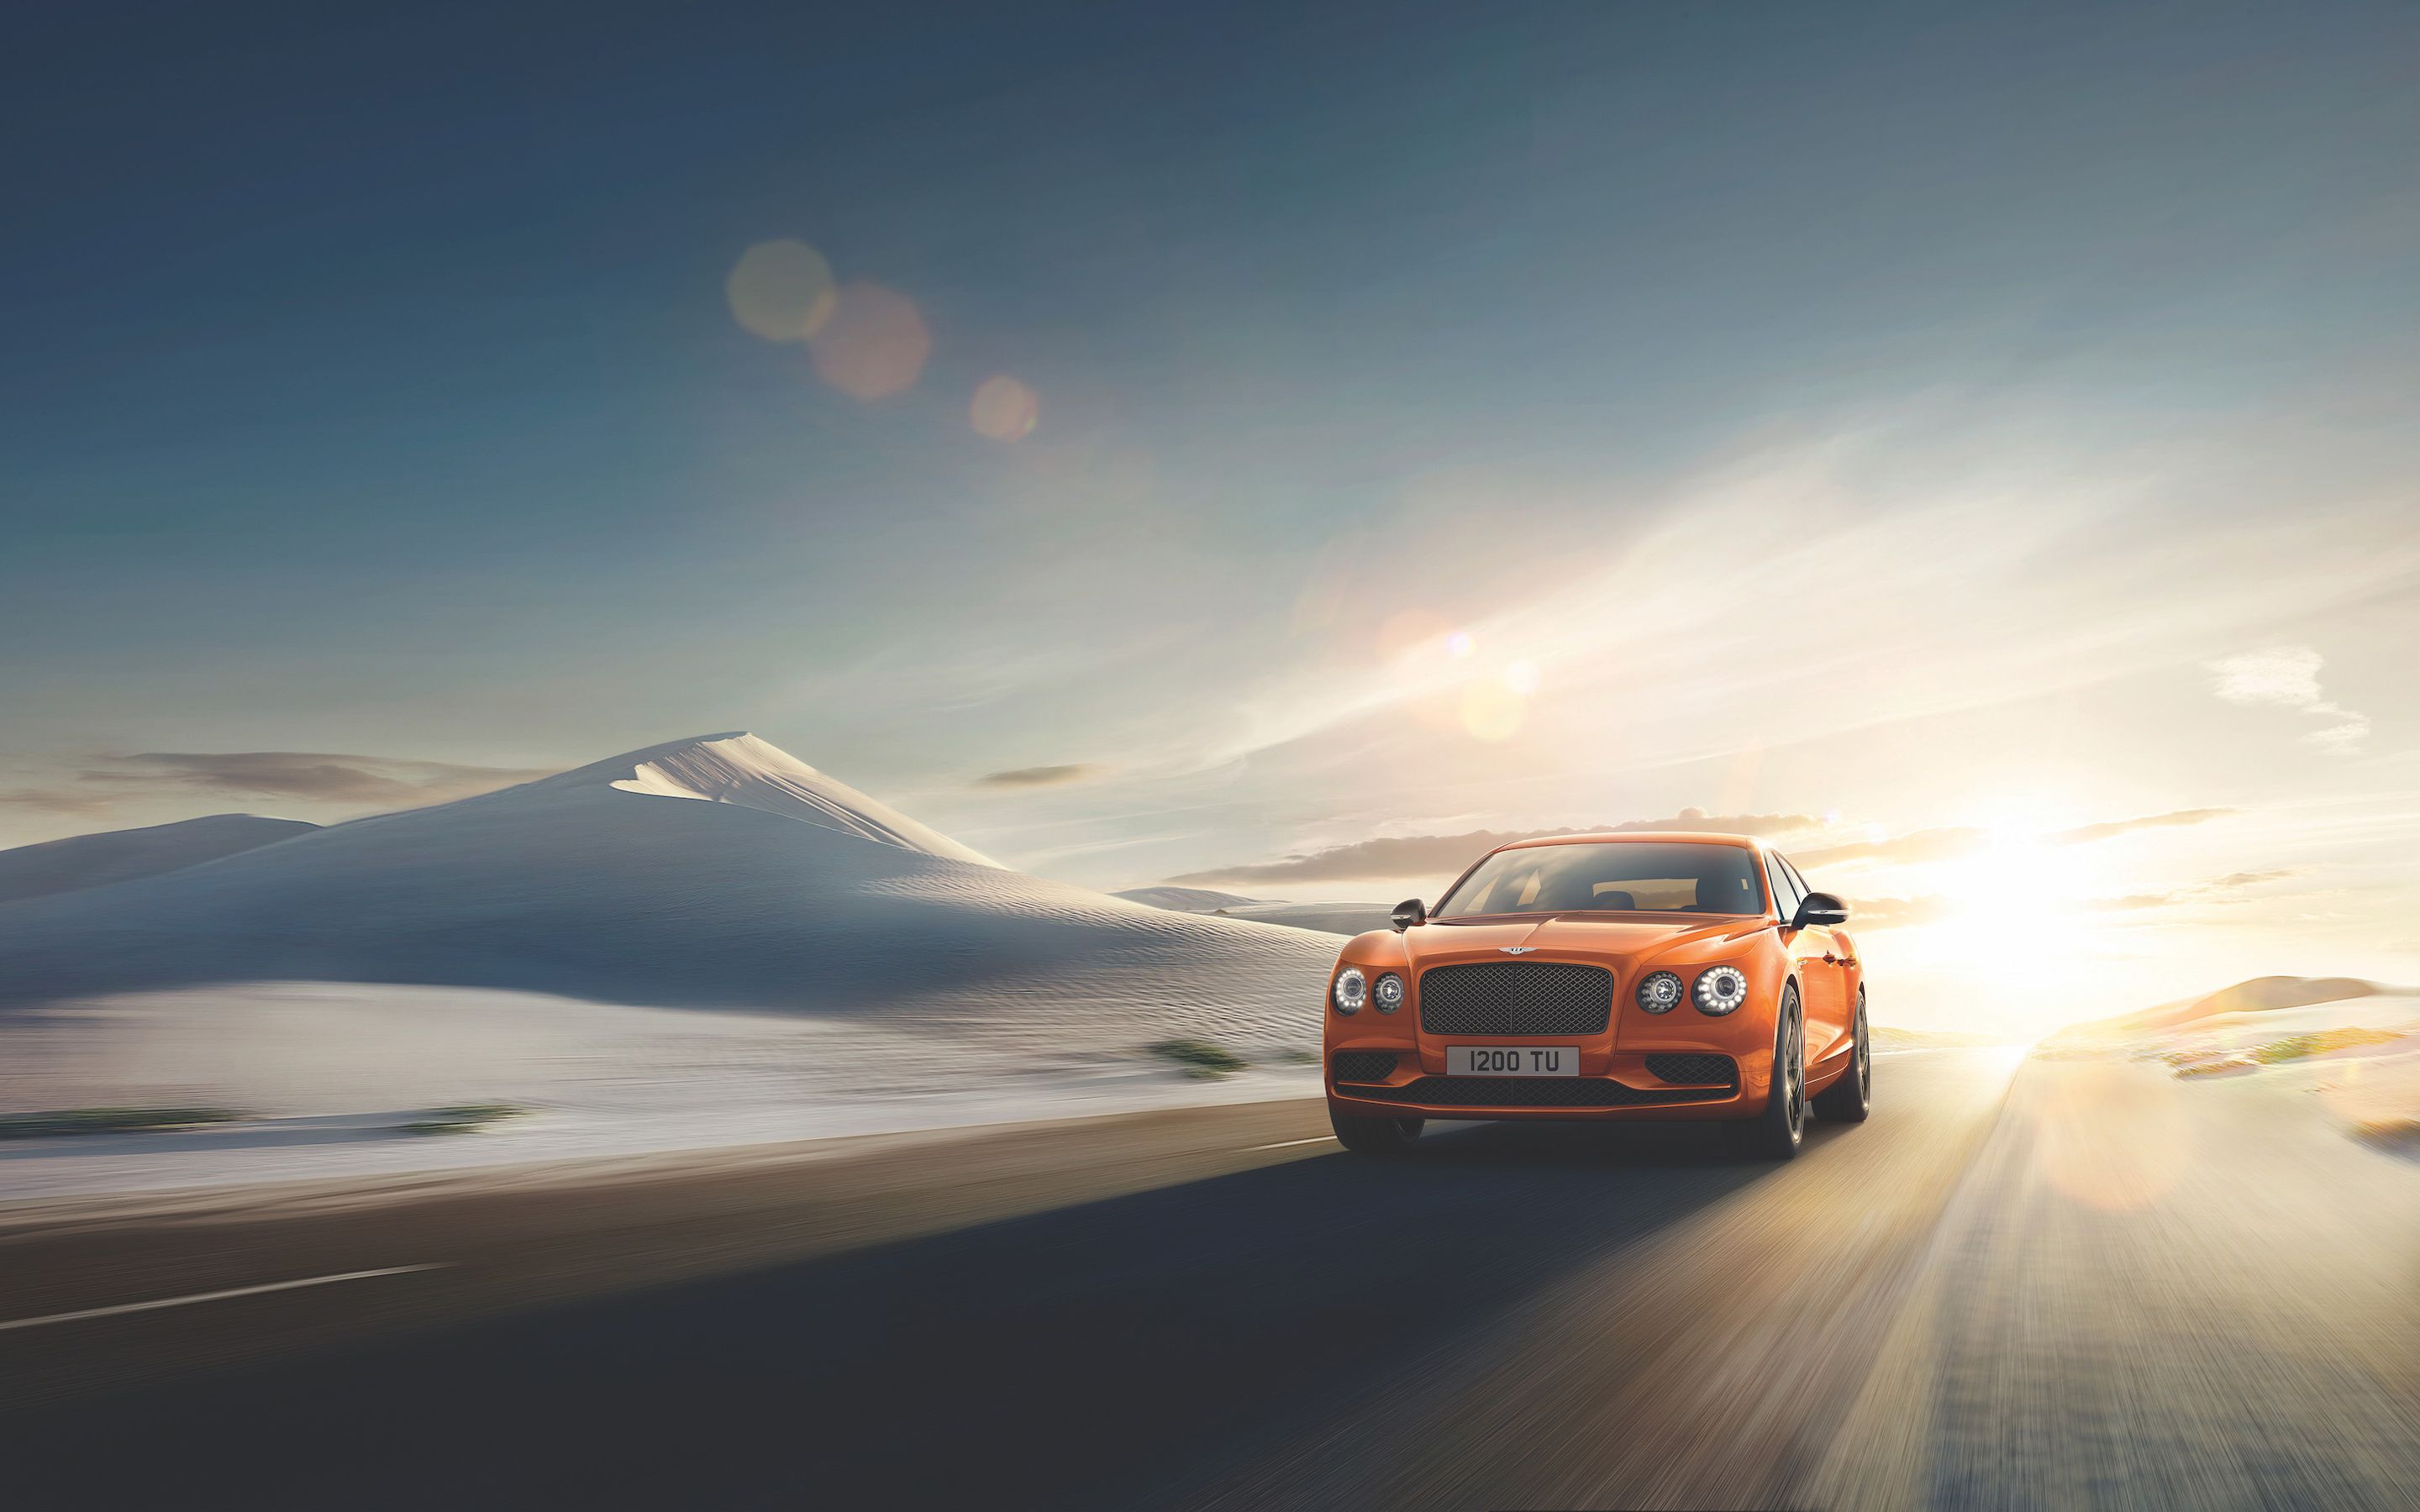 A 2018 Bentley Flying Spur V8 driving on a desert road with the sun setting in the background. - Cars